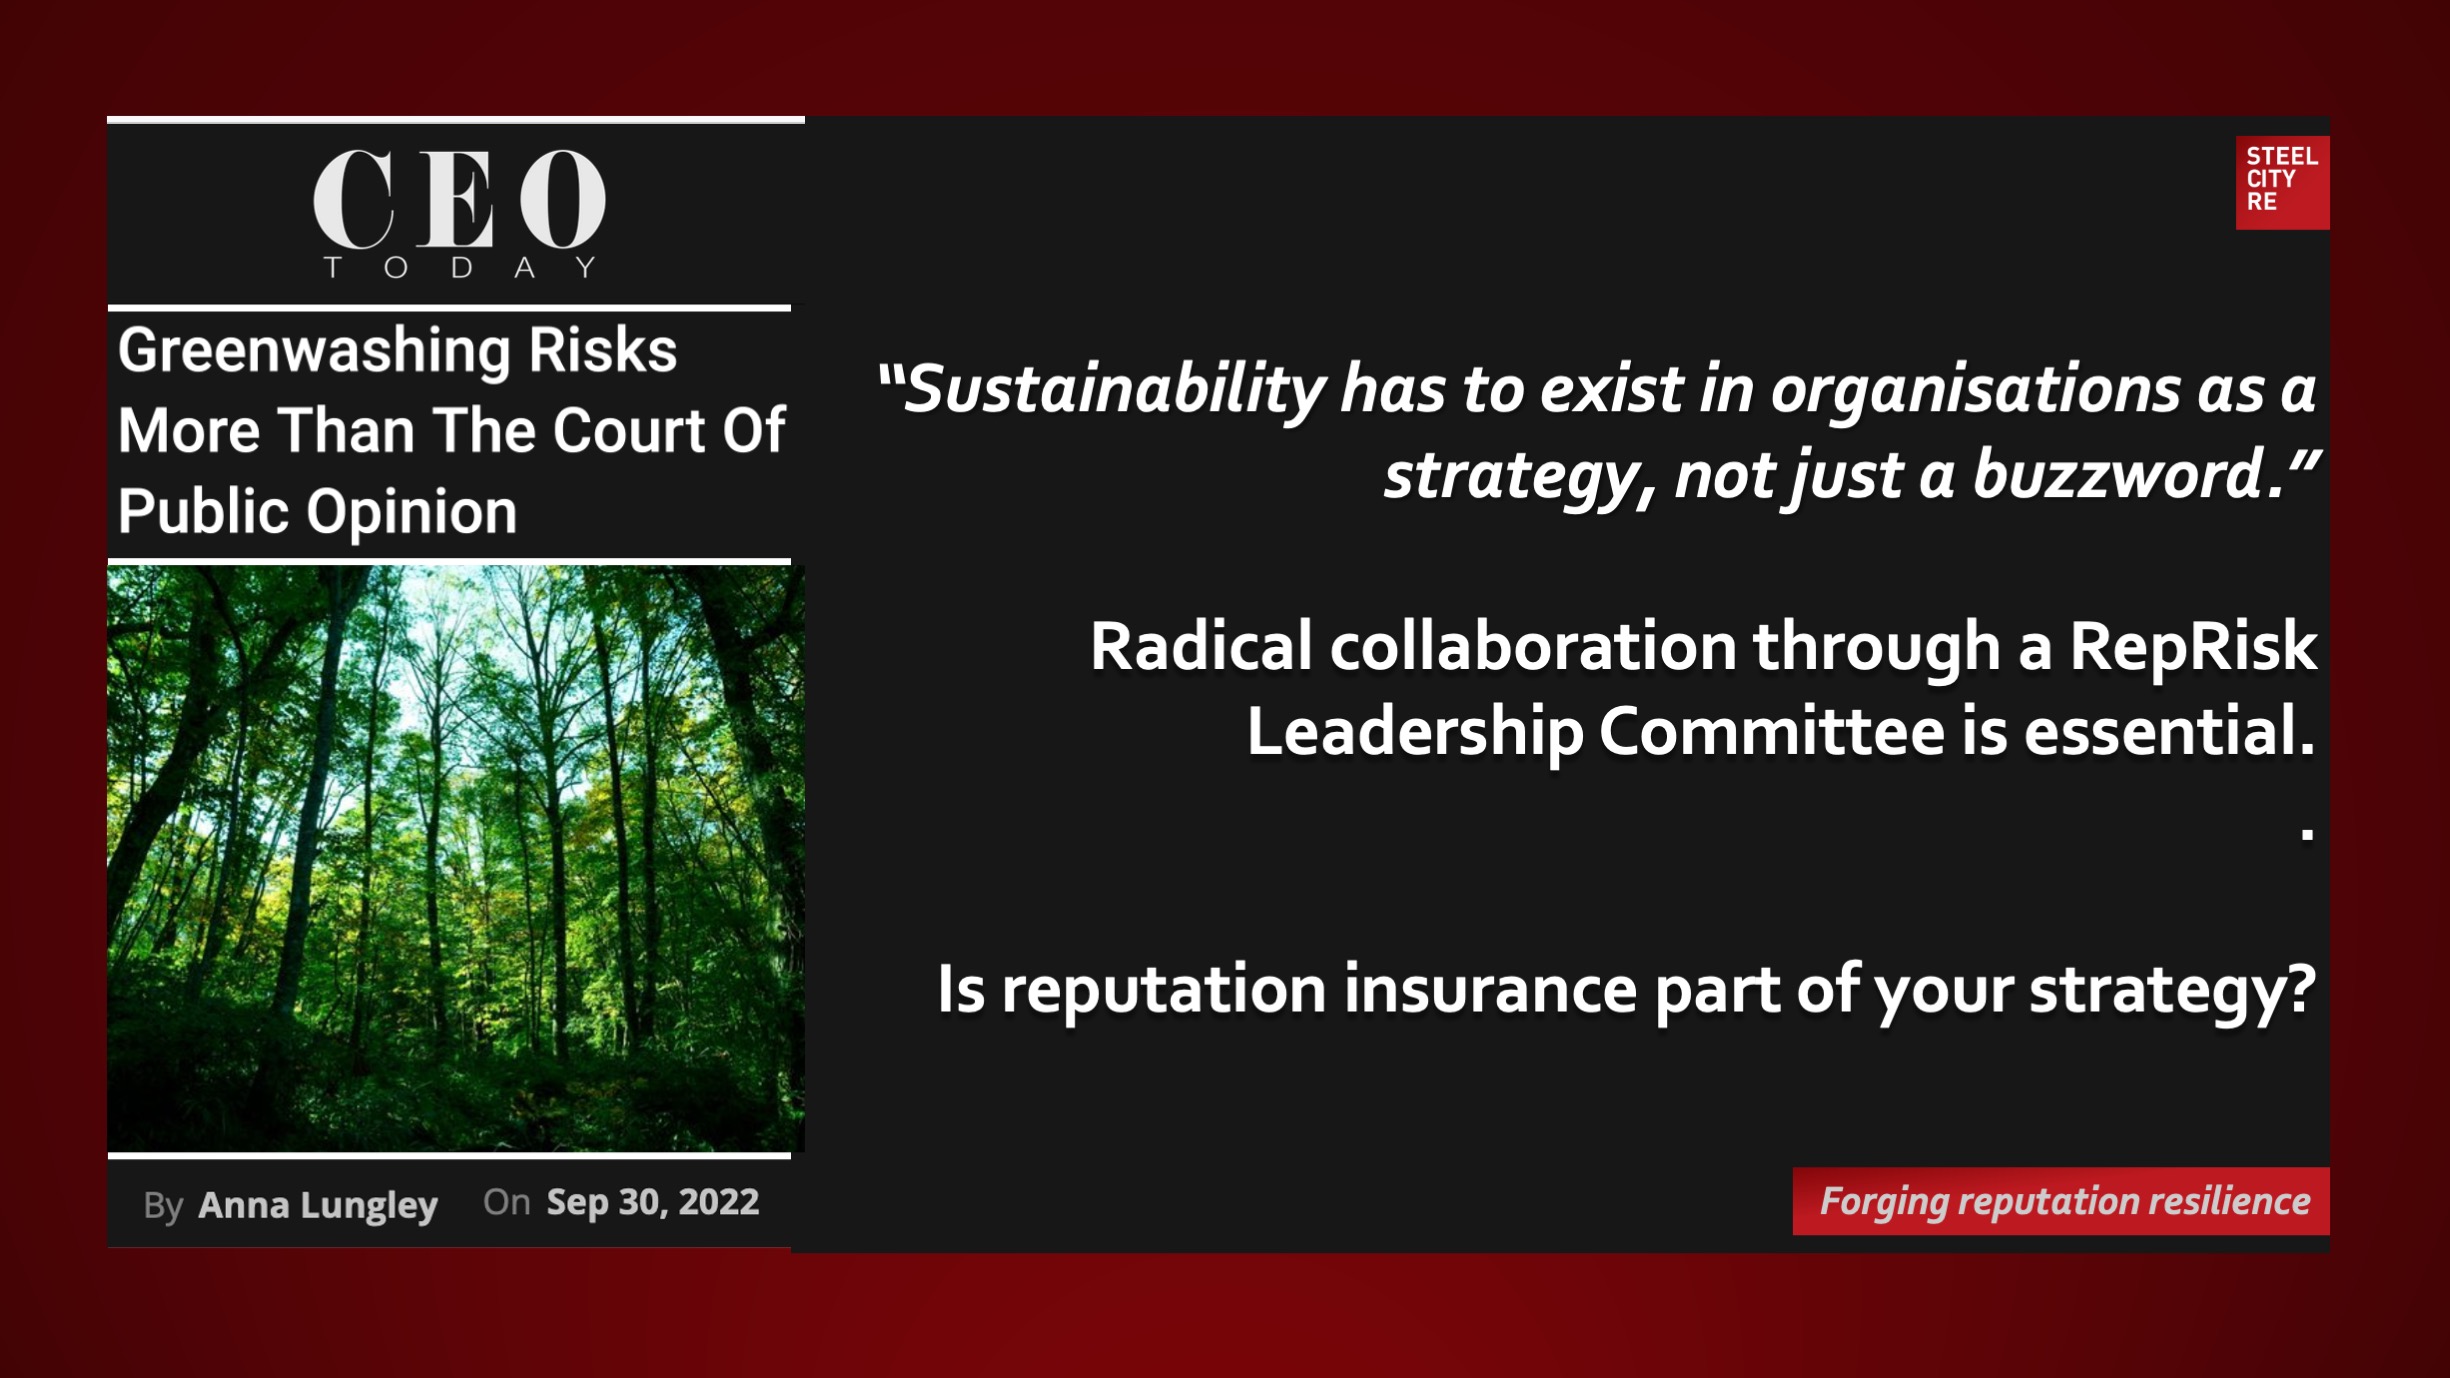 Radical collaboration for sustainability strategy. Sustainability has to exist in organisations as a strategy, not just a buzzword.